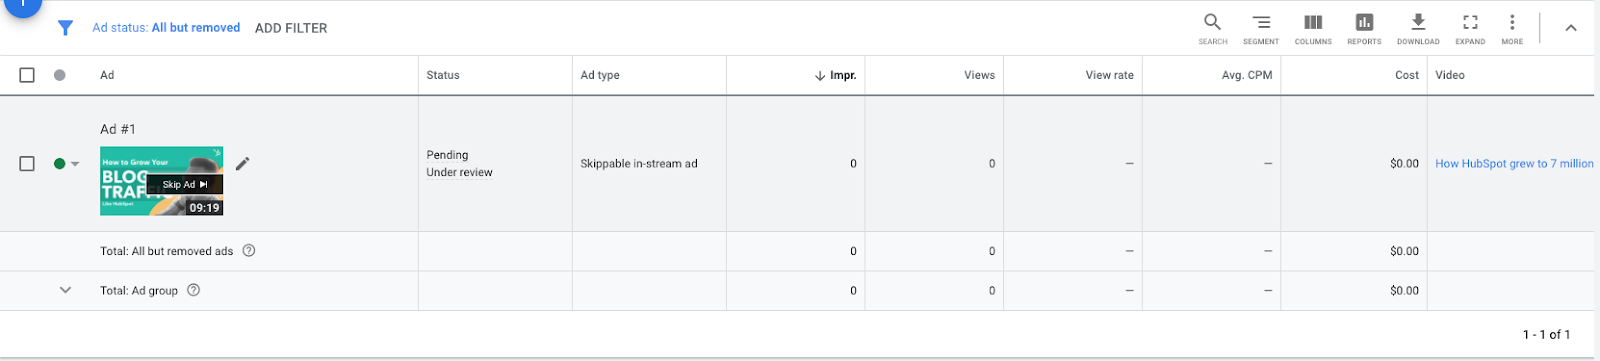 YouTube ad campaign views and impressions dashboard